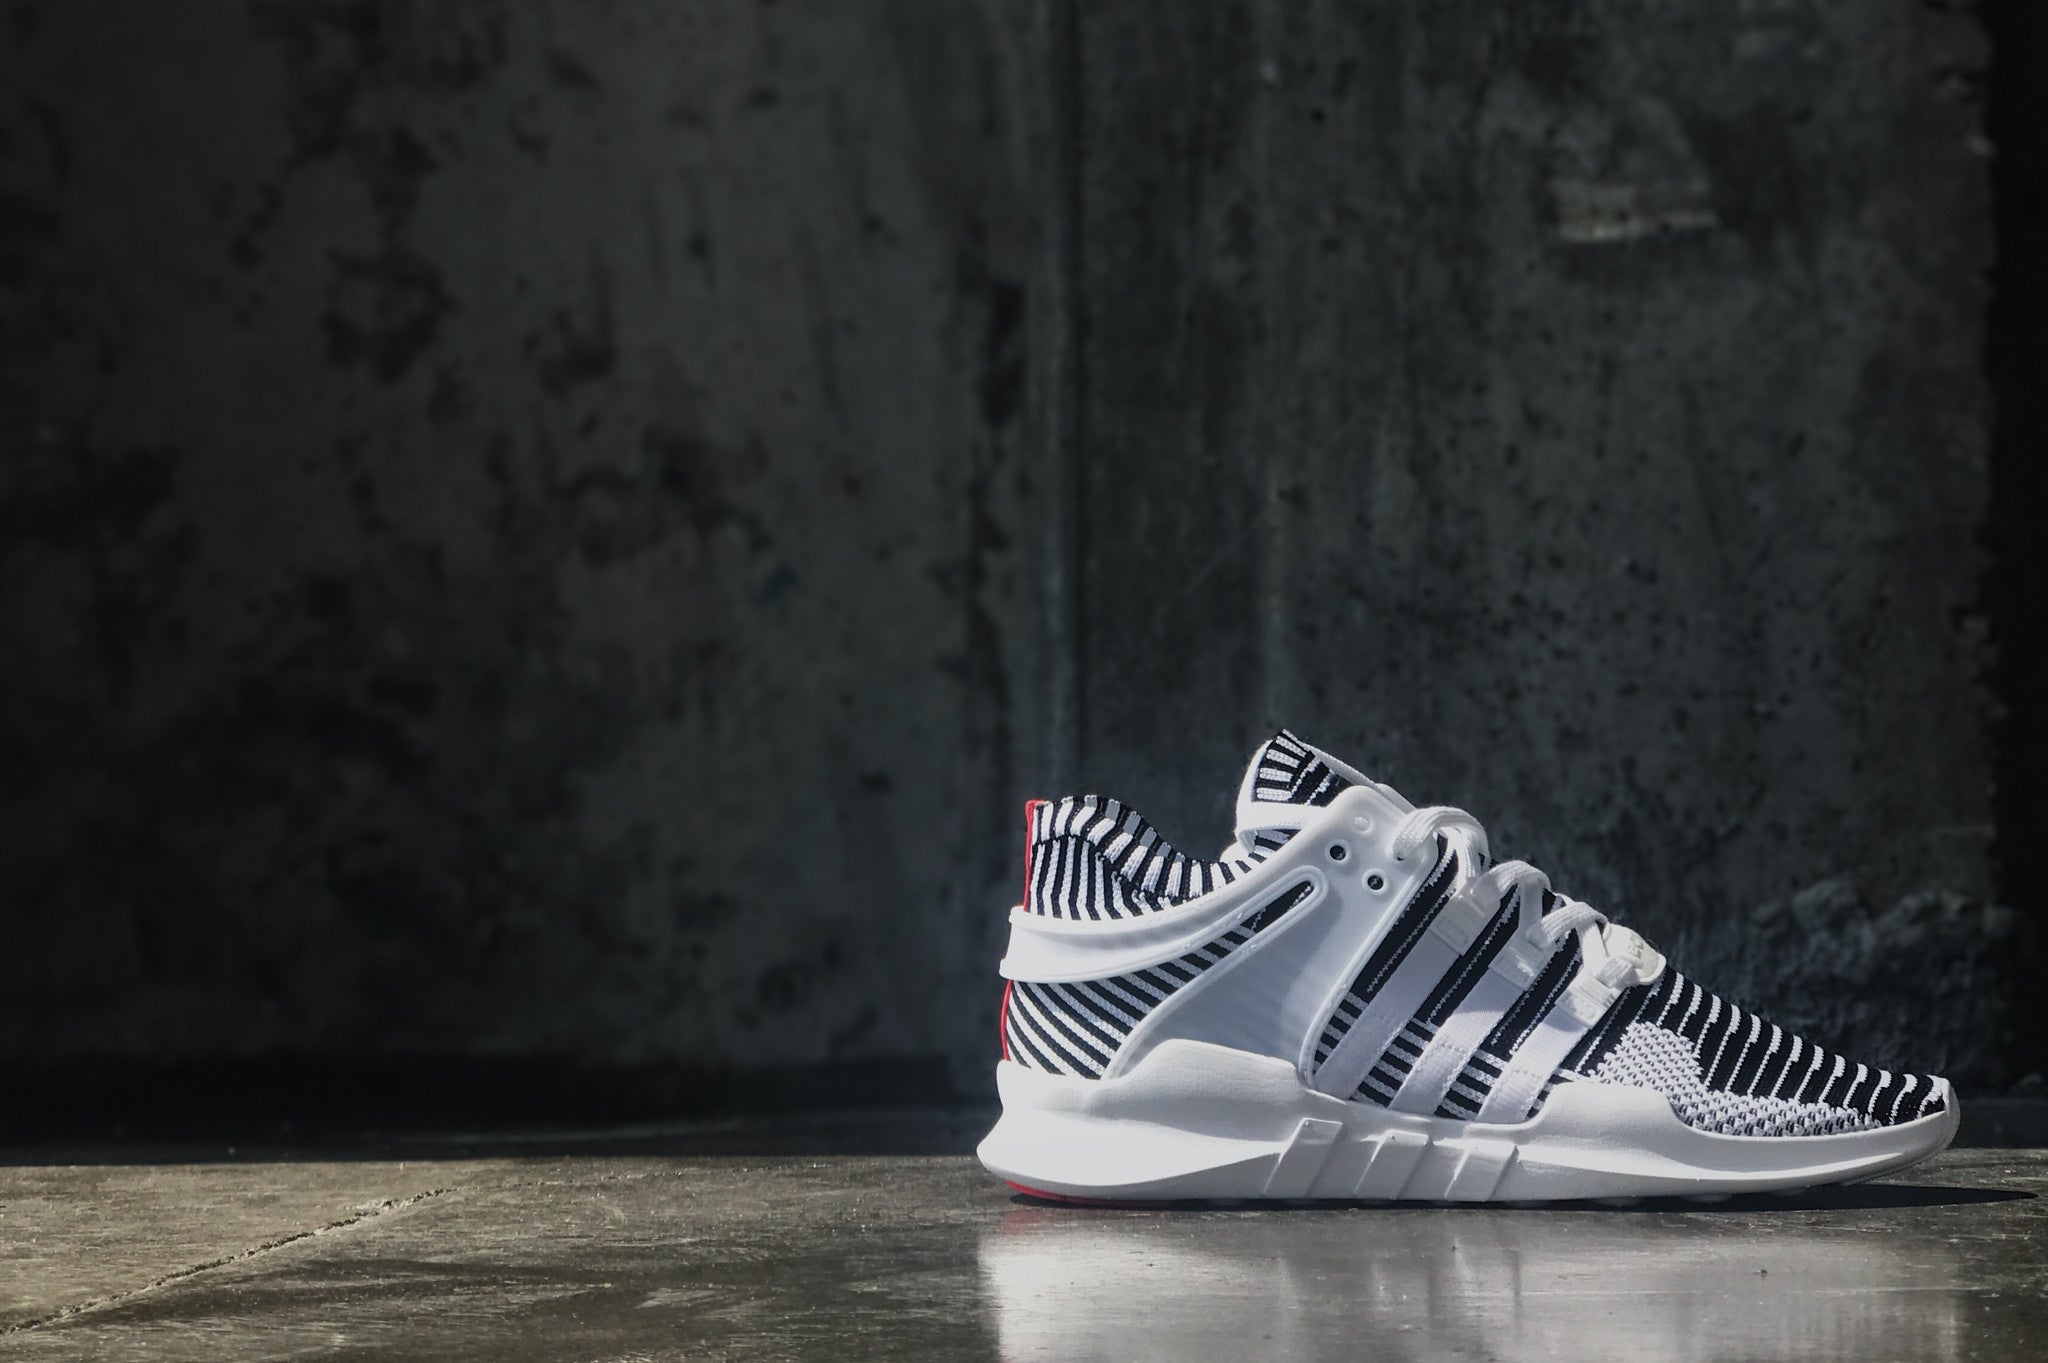 adidas EQT ADV "Zebra" Release | ROOTED